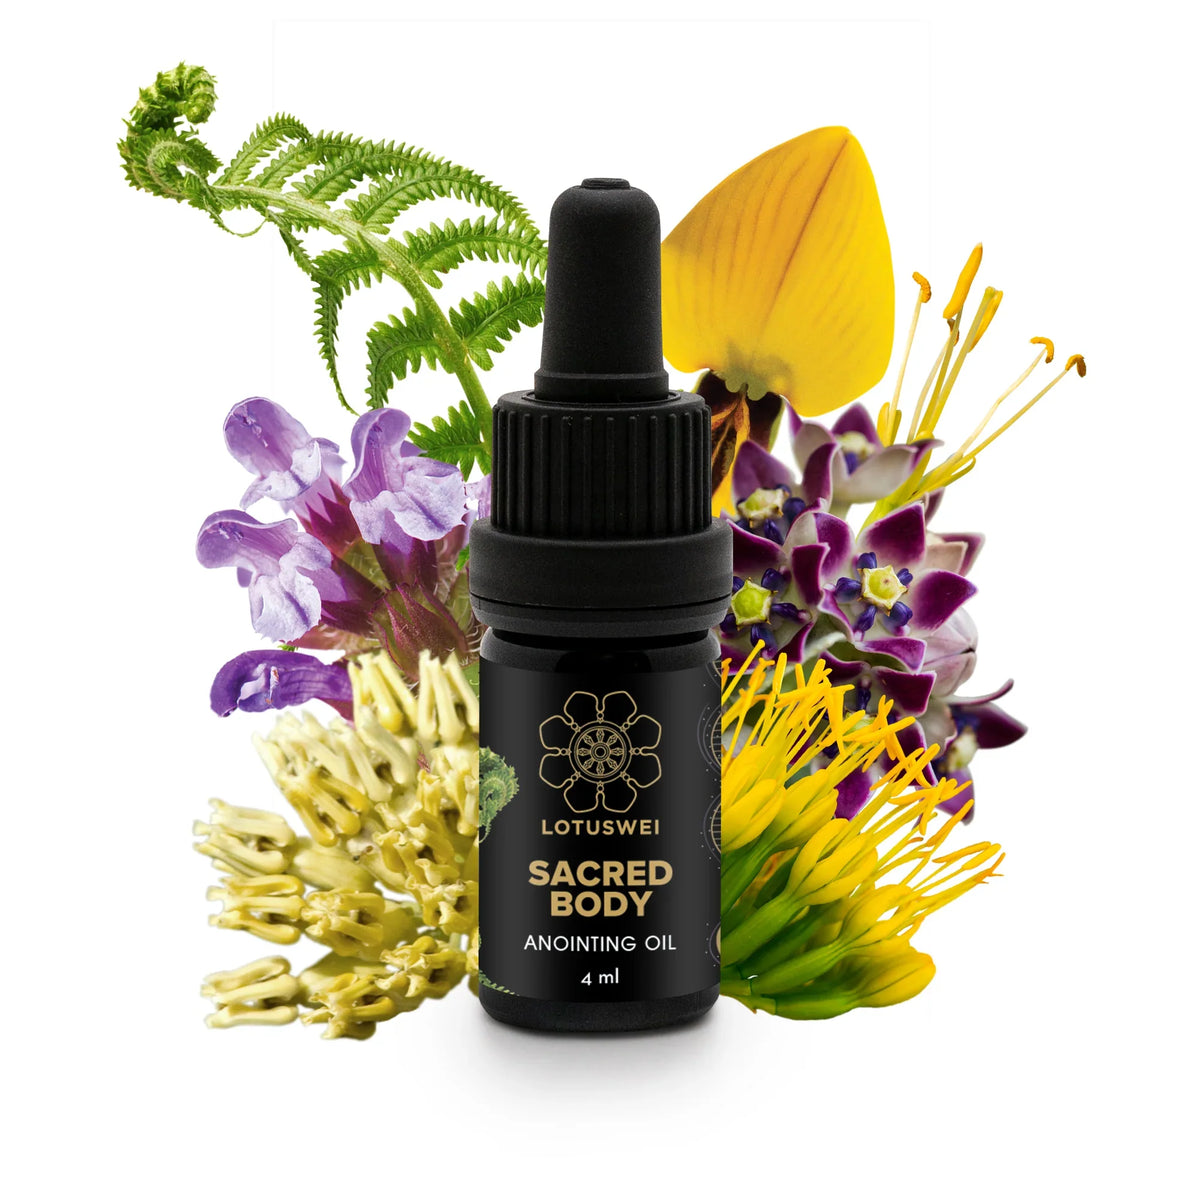 Sacred Body Anointing Oil